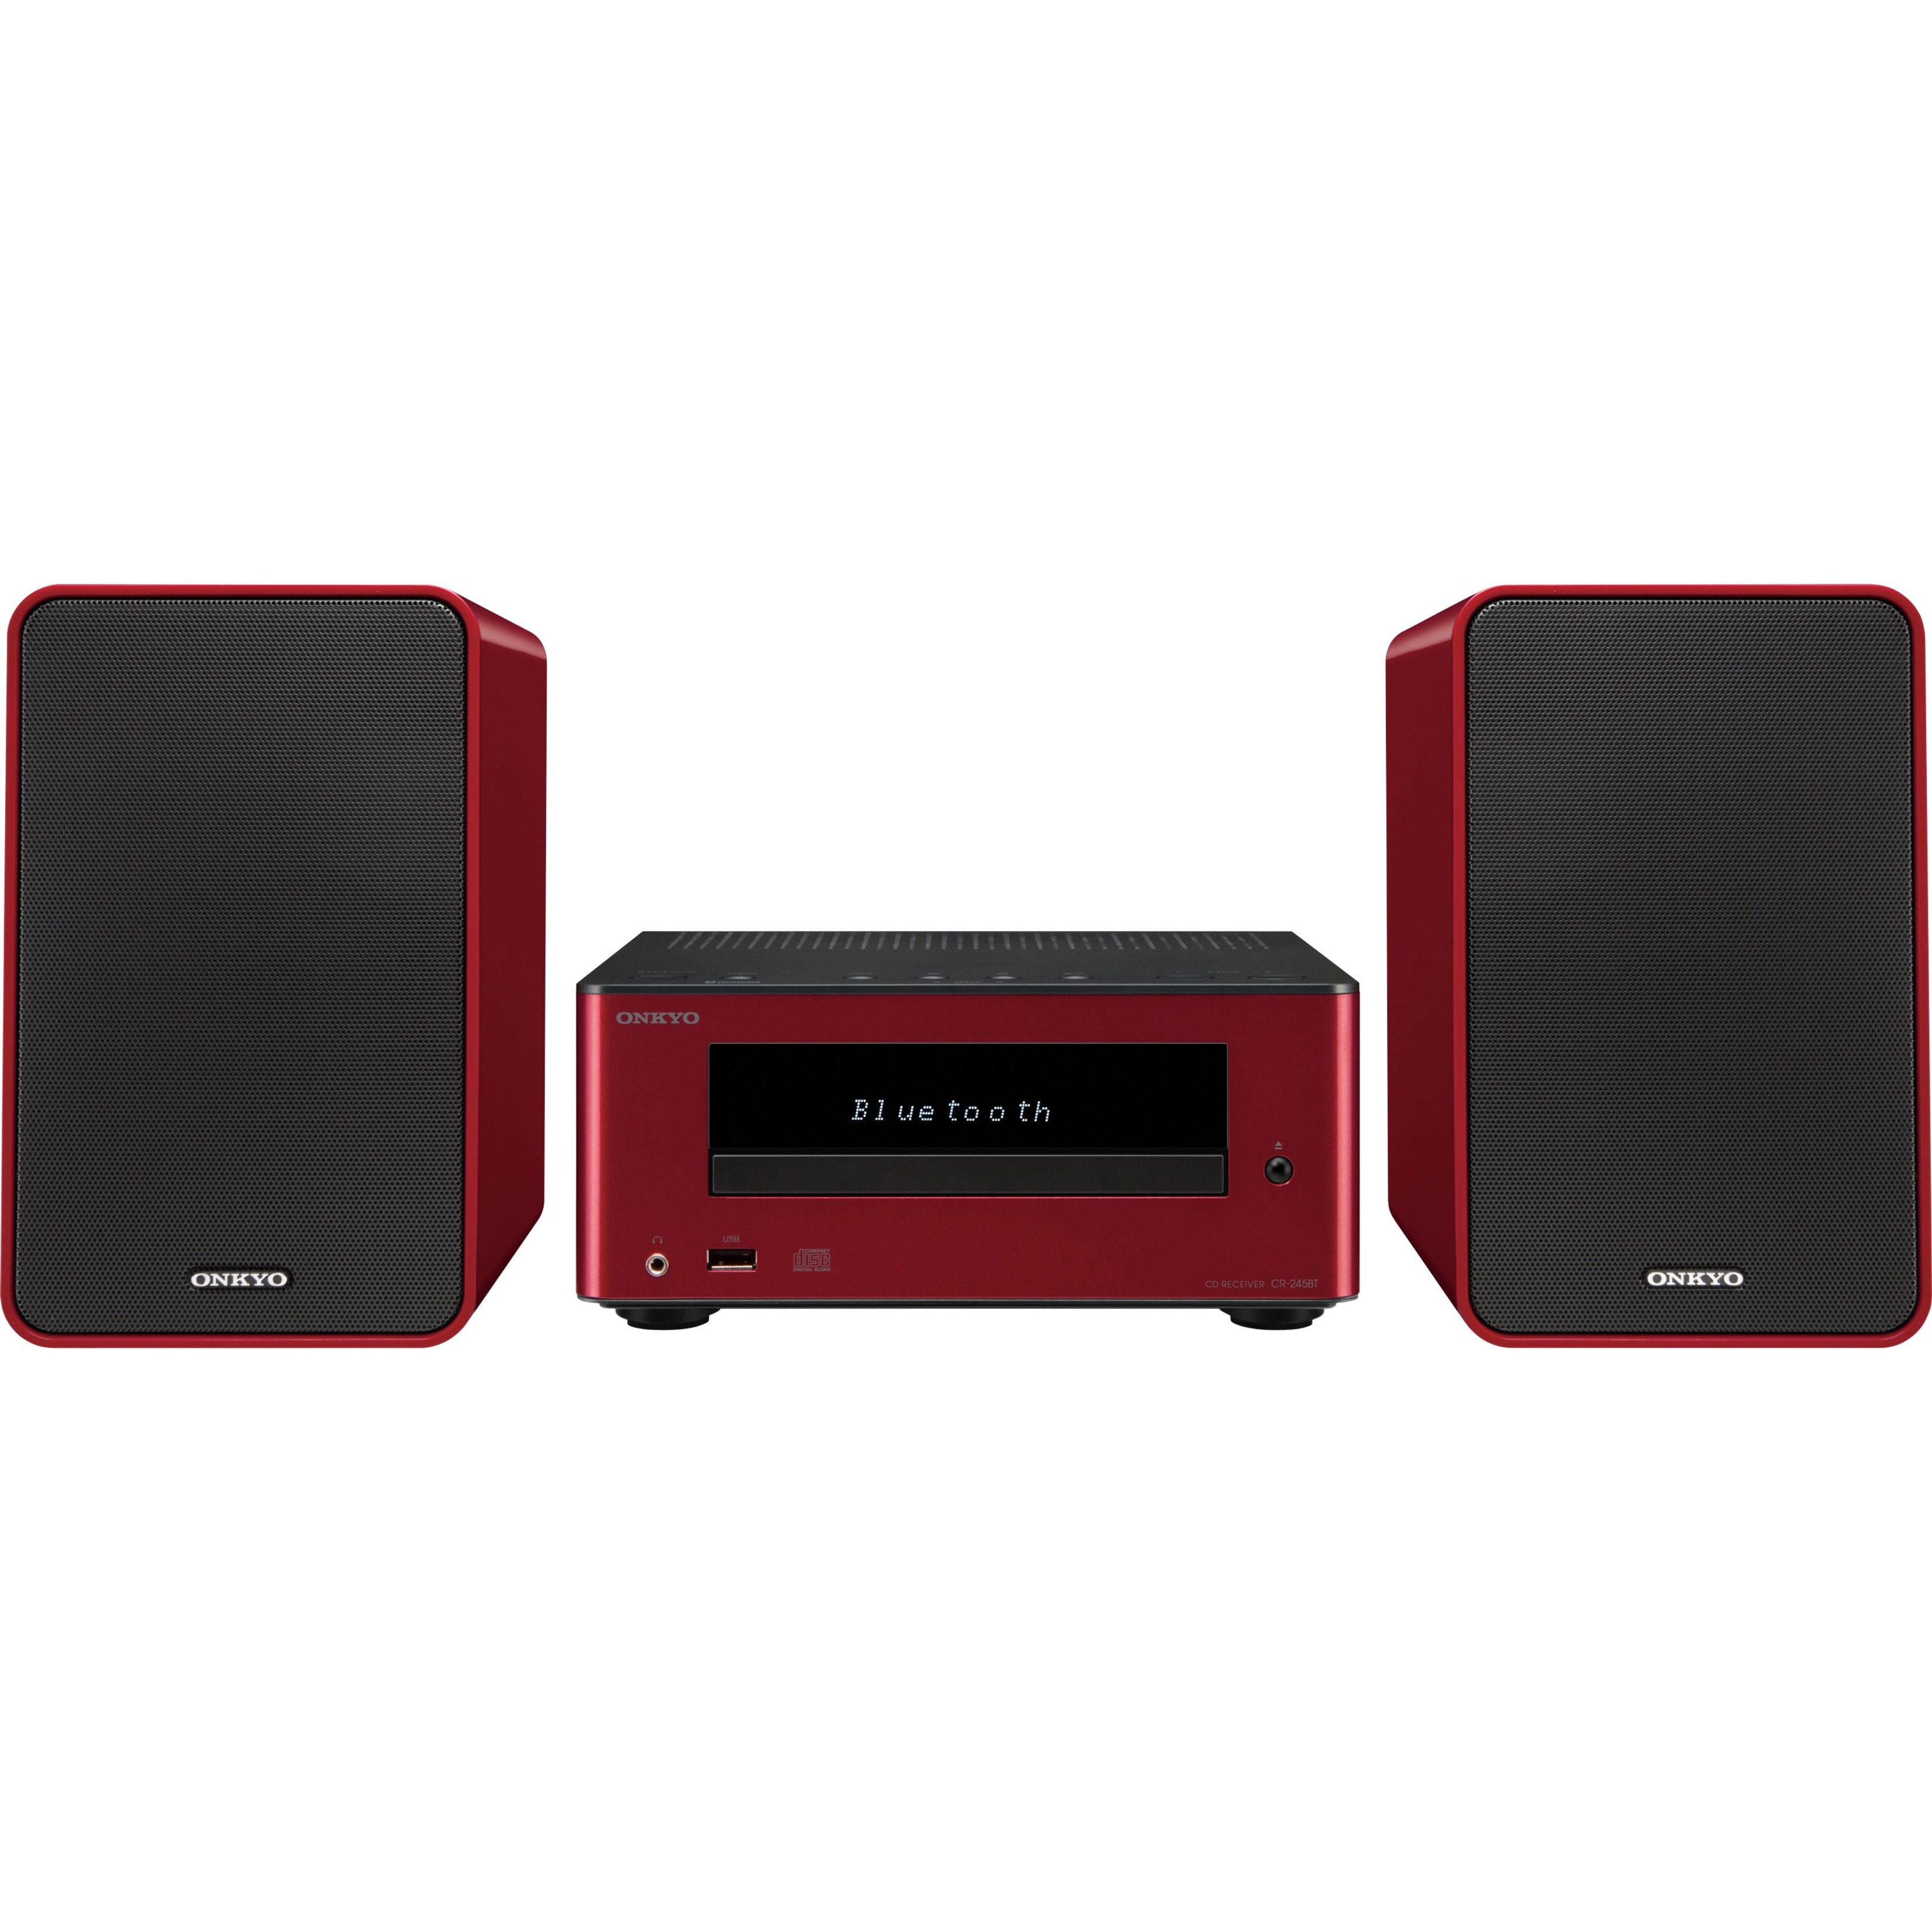 Onkyo CS-355 Mini Hi-Fi System, 30 W RMS, iPod Supported, Red - image 1 of 3